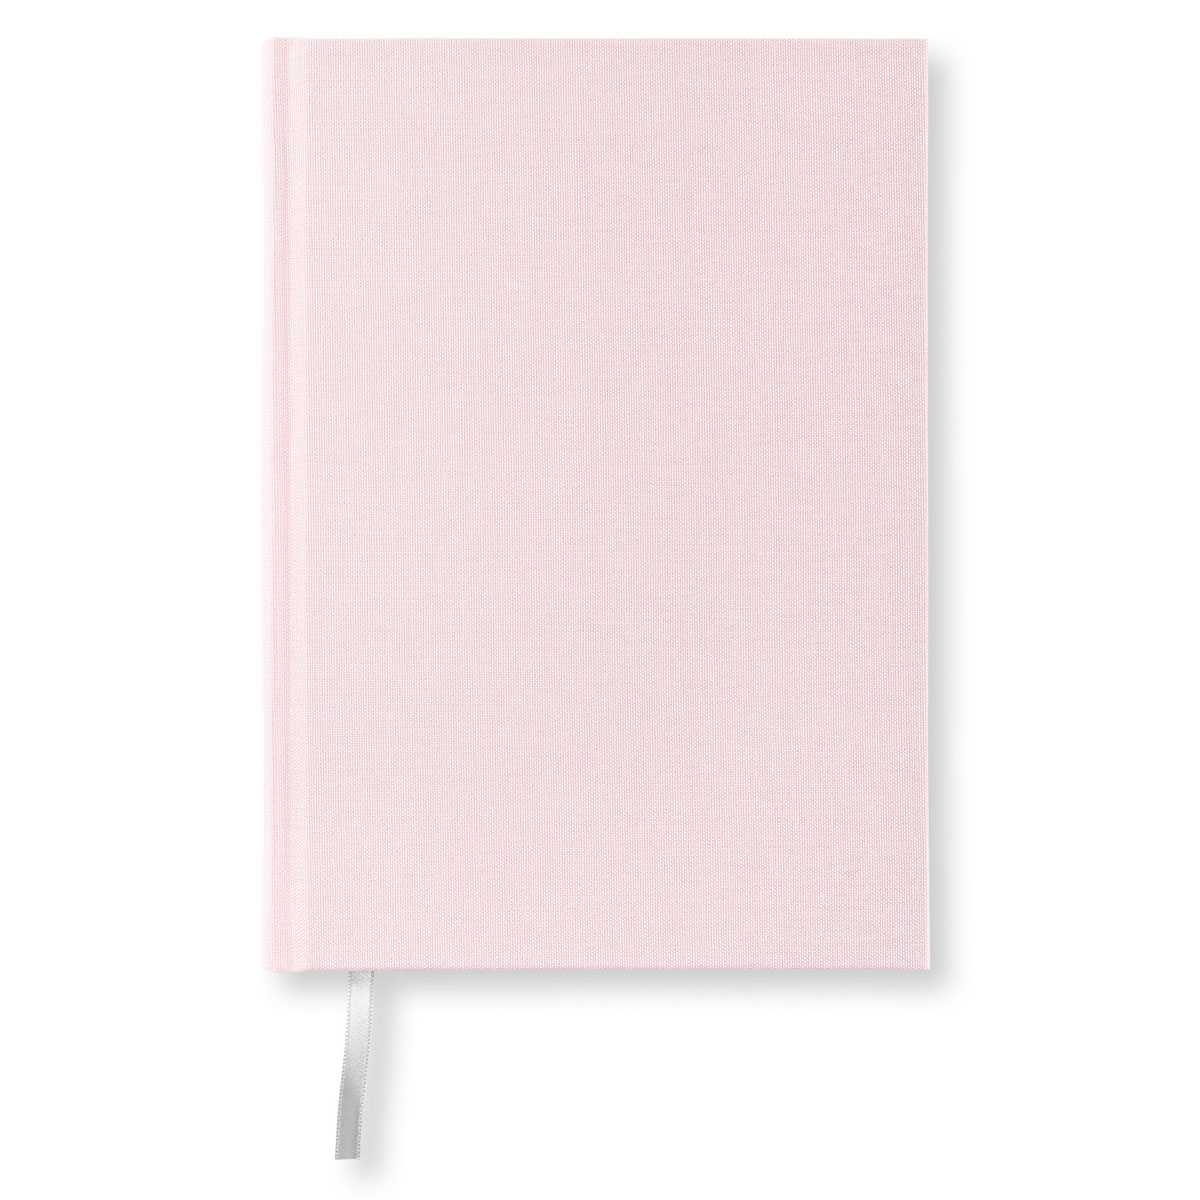 Notatbok Paperstyle A5 256 s. Linjert Dusty Rose